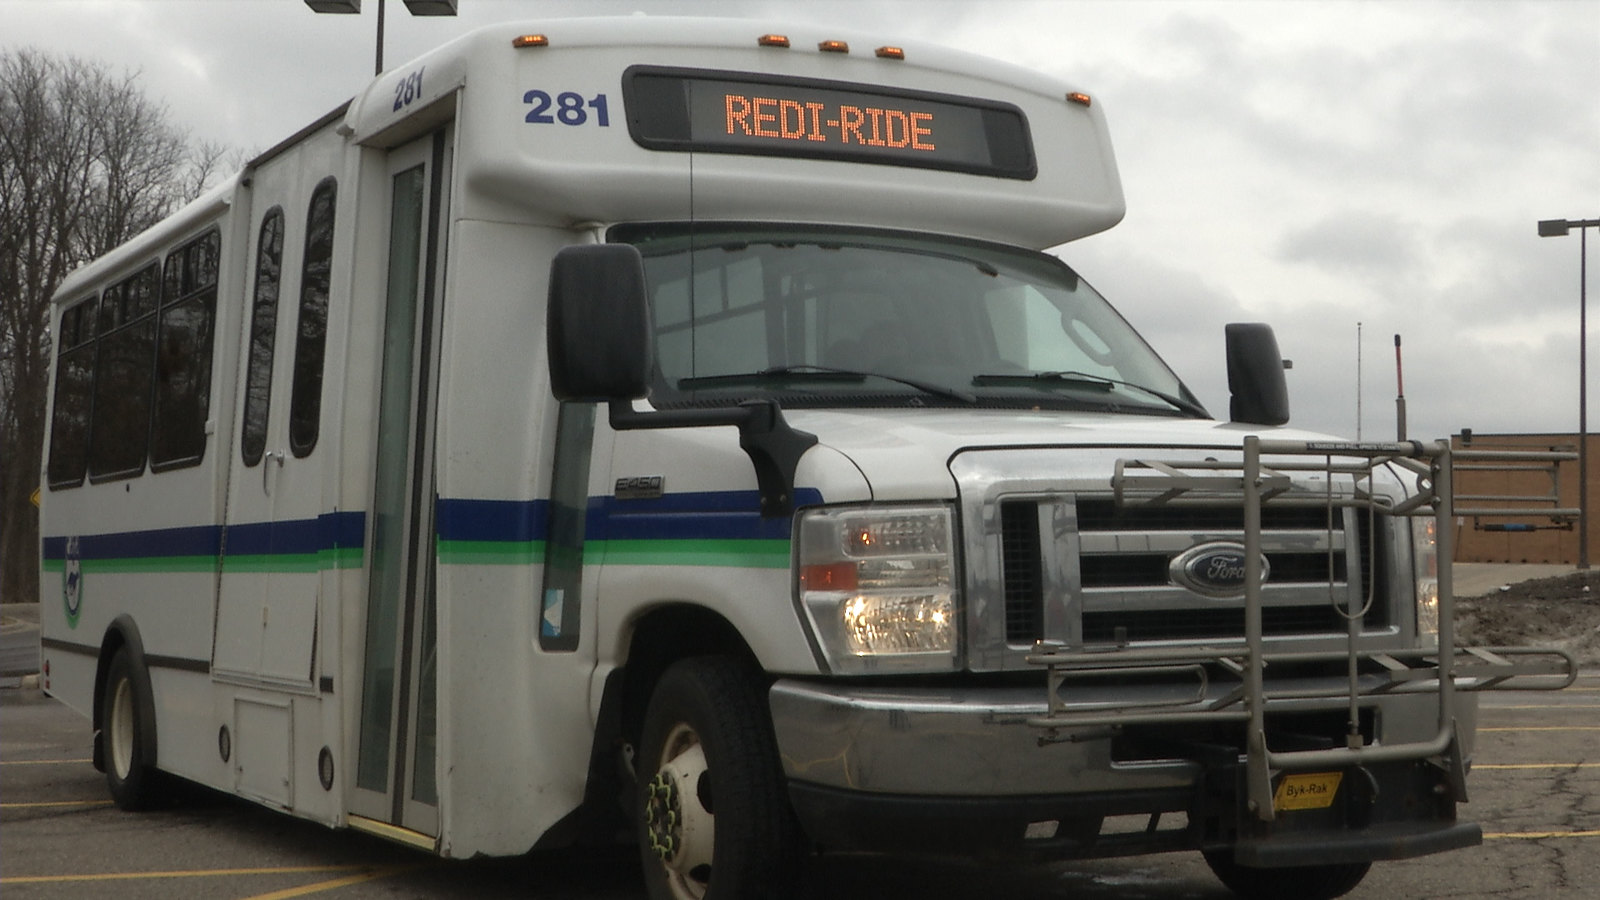 Township Board Discusses Redi-Ride Millage at Recent Meeting